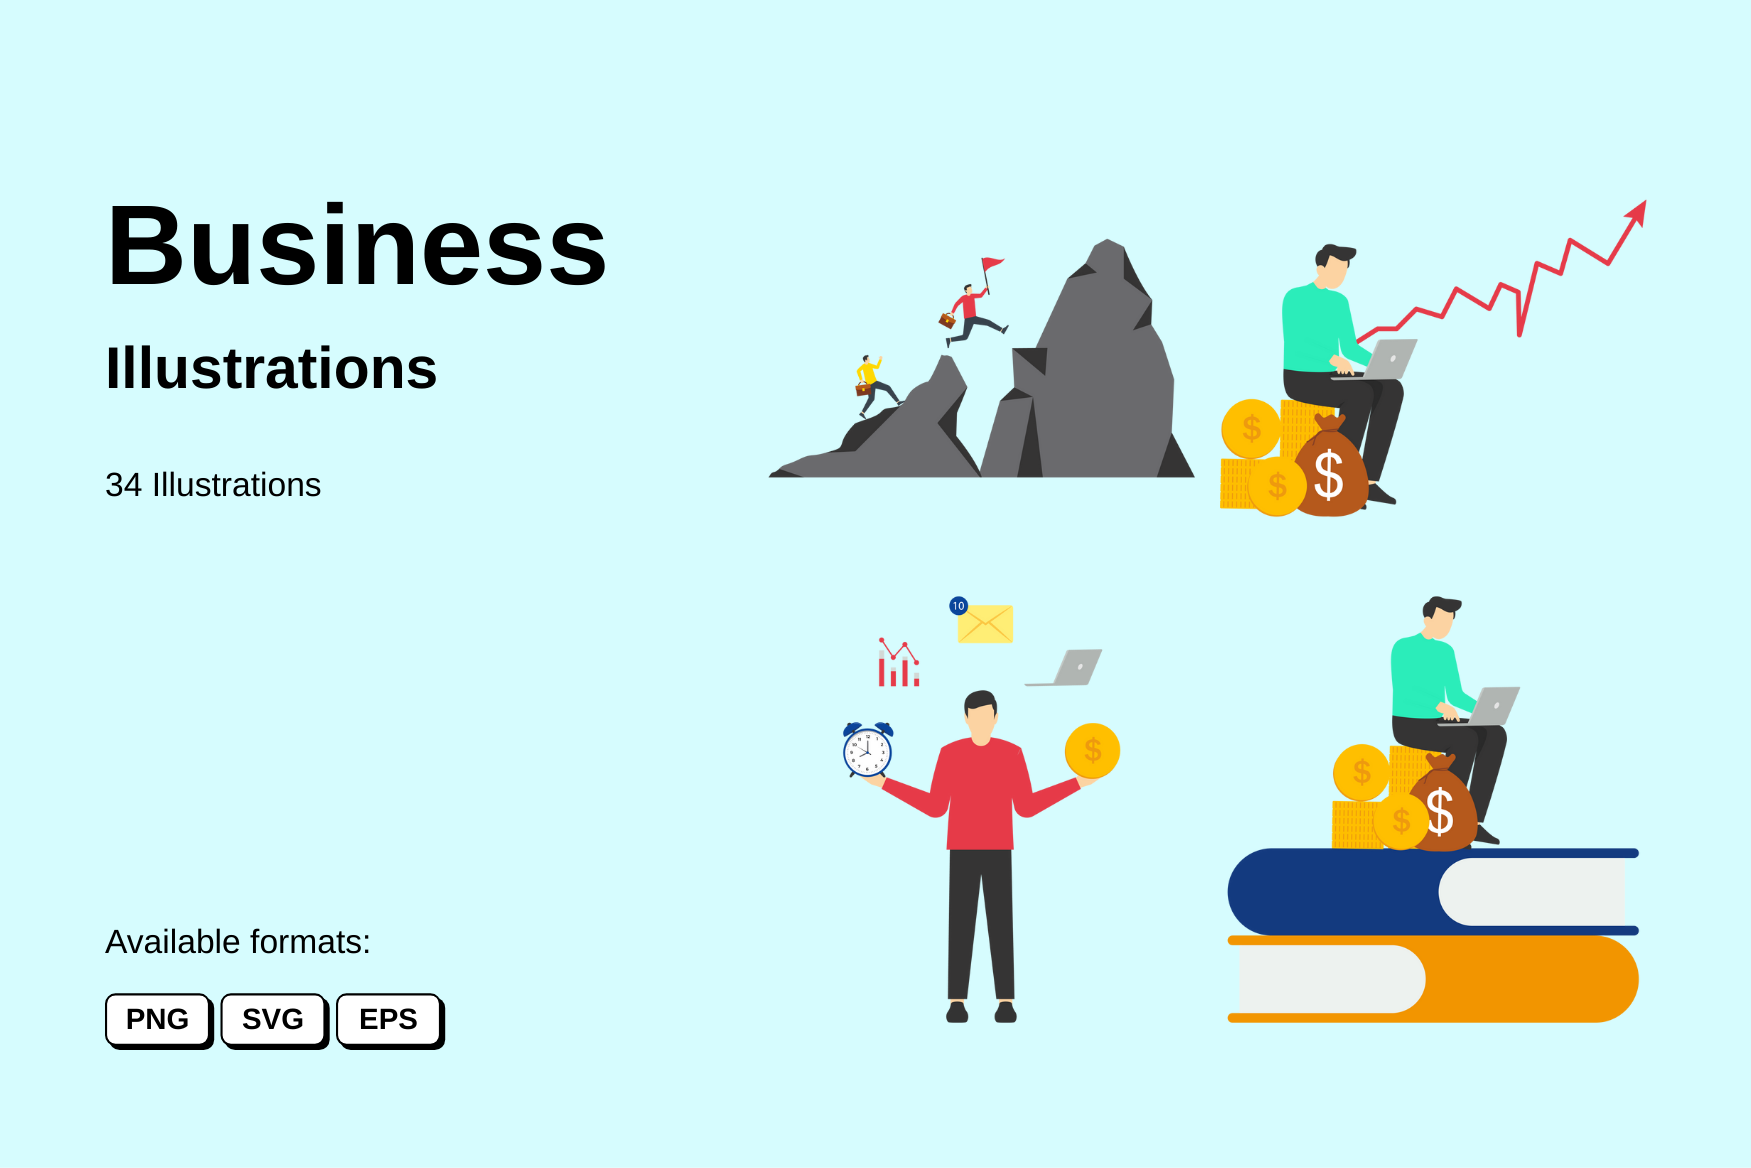 Premium Business Illustration pack from Business Illustrations